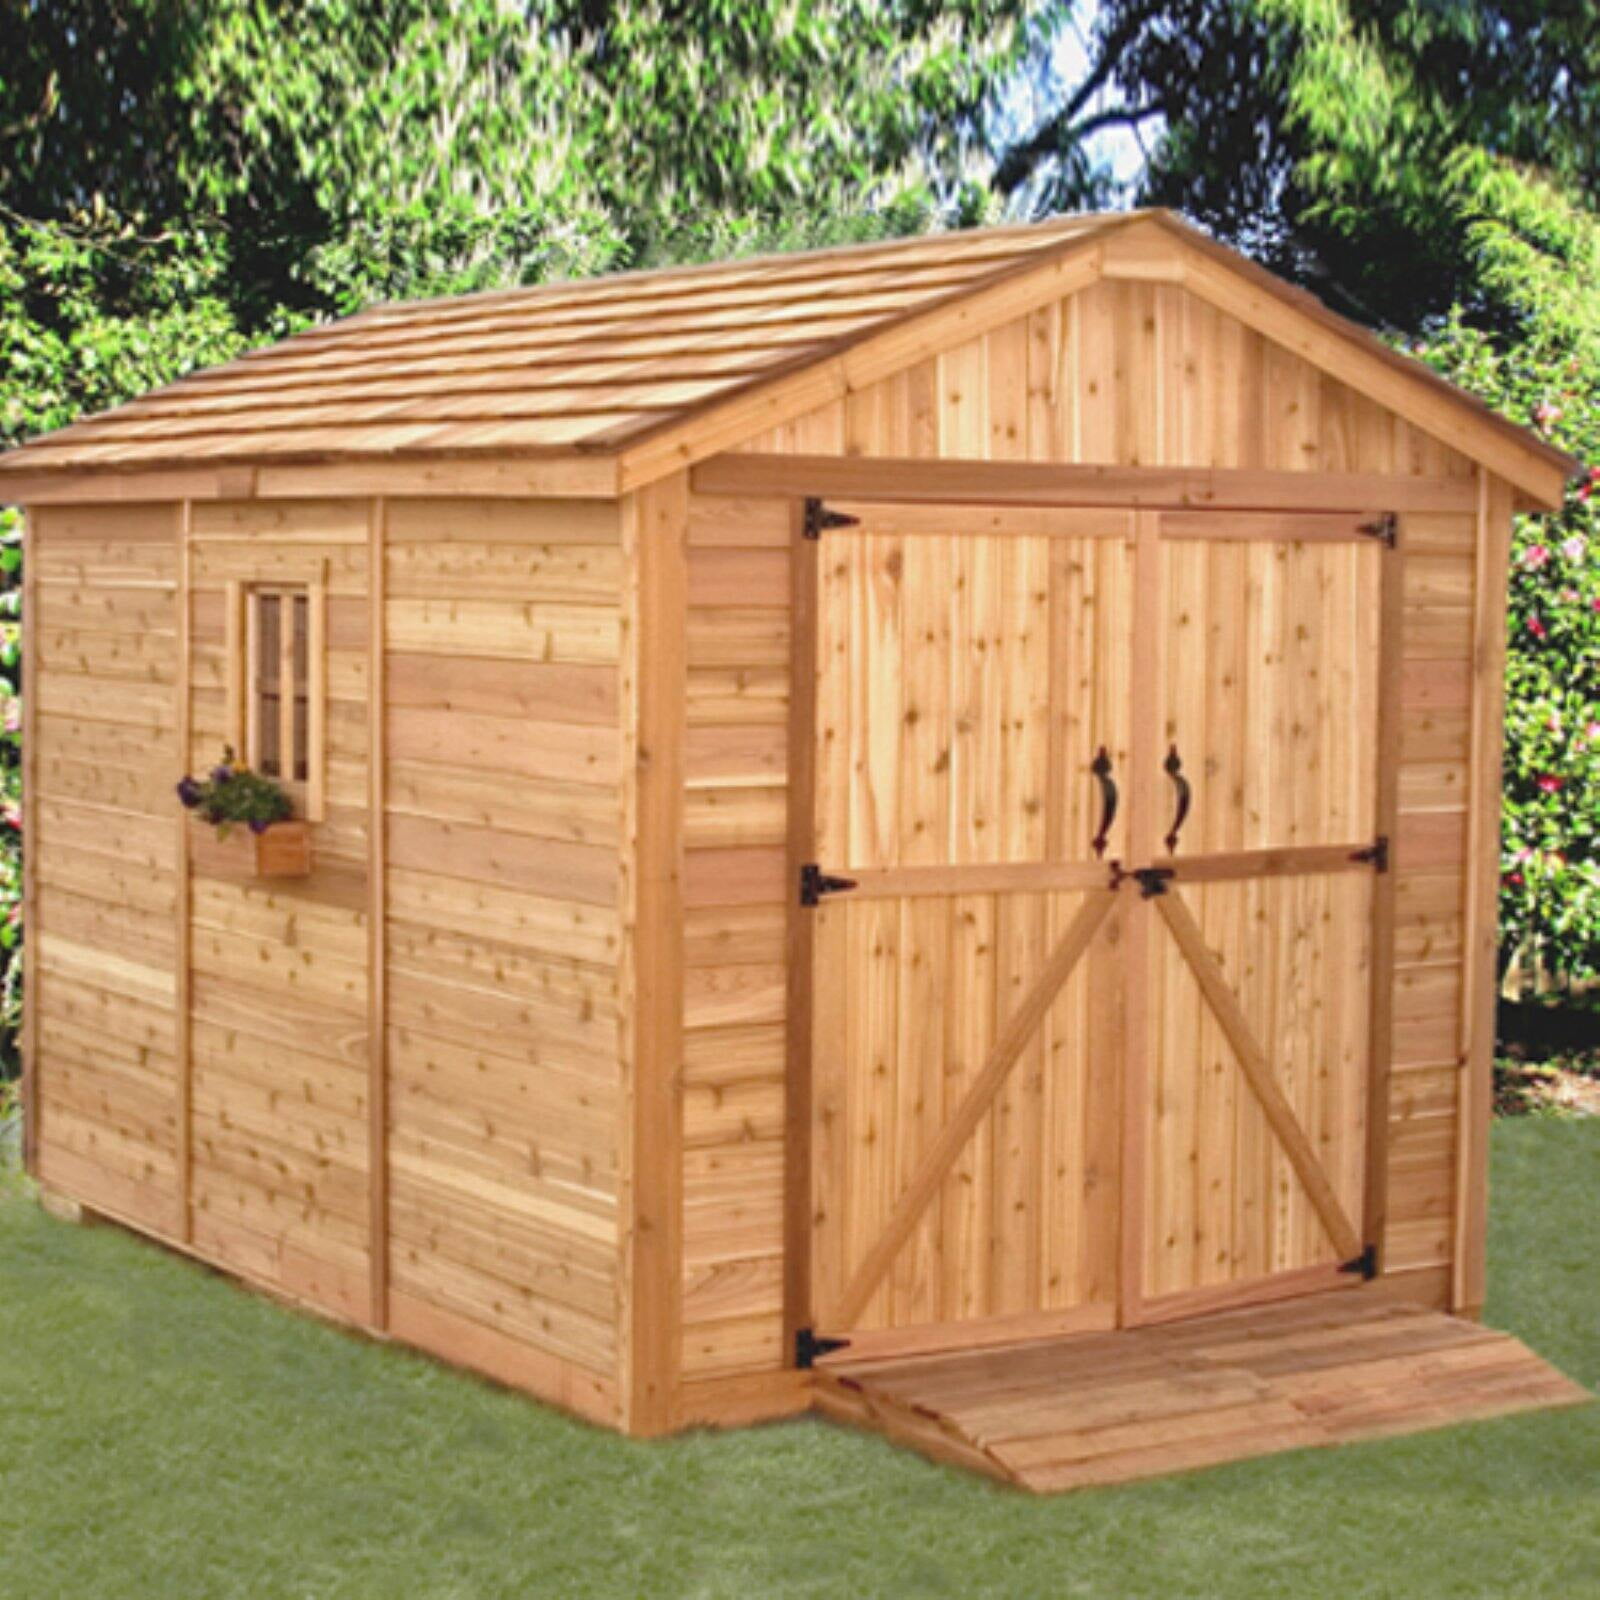 Outdoor Living Today SM812 SpaceMaker 8 x 12 ft. Storage Shed - Walmart 